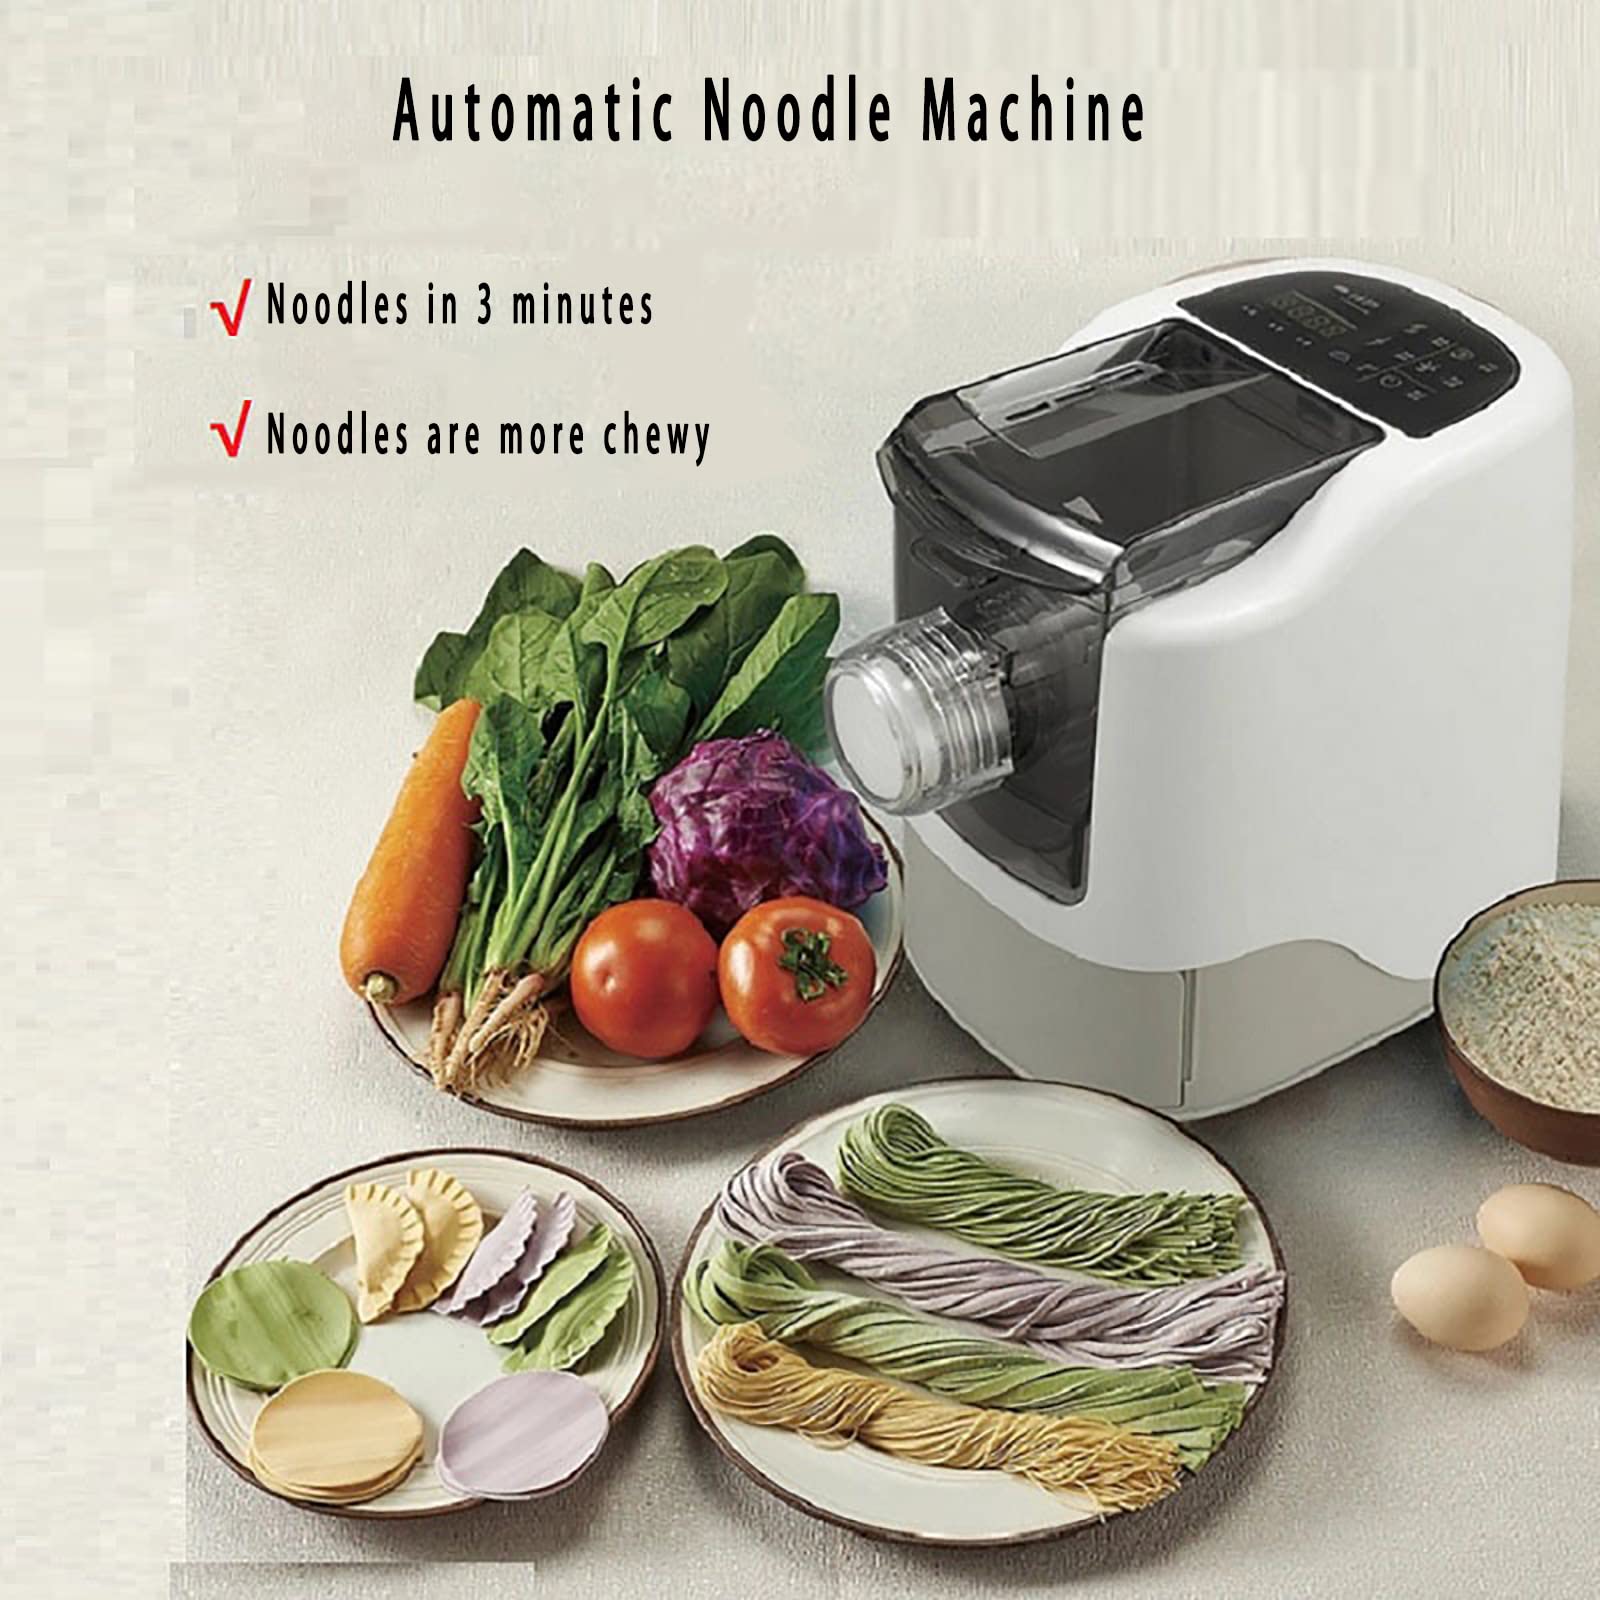 Electric Pasta Machine Automatic Noodle Maker Includes 13 Molds for Different Shapes, Make in 15 Minutes Kitchen Appliances - Fresh Noodle Machine - 2